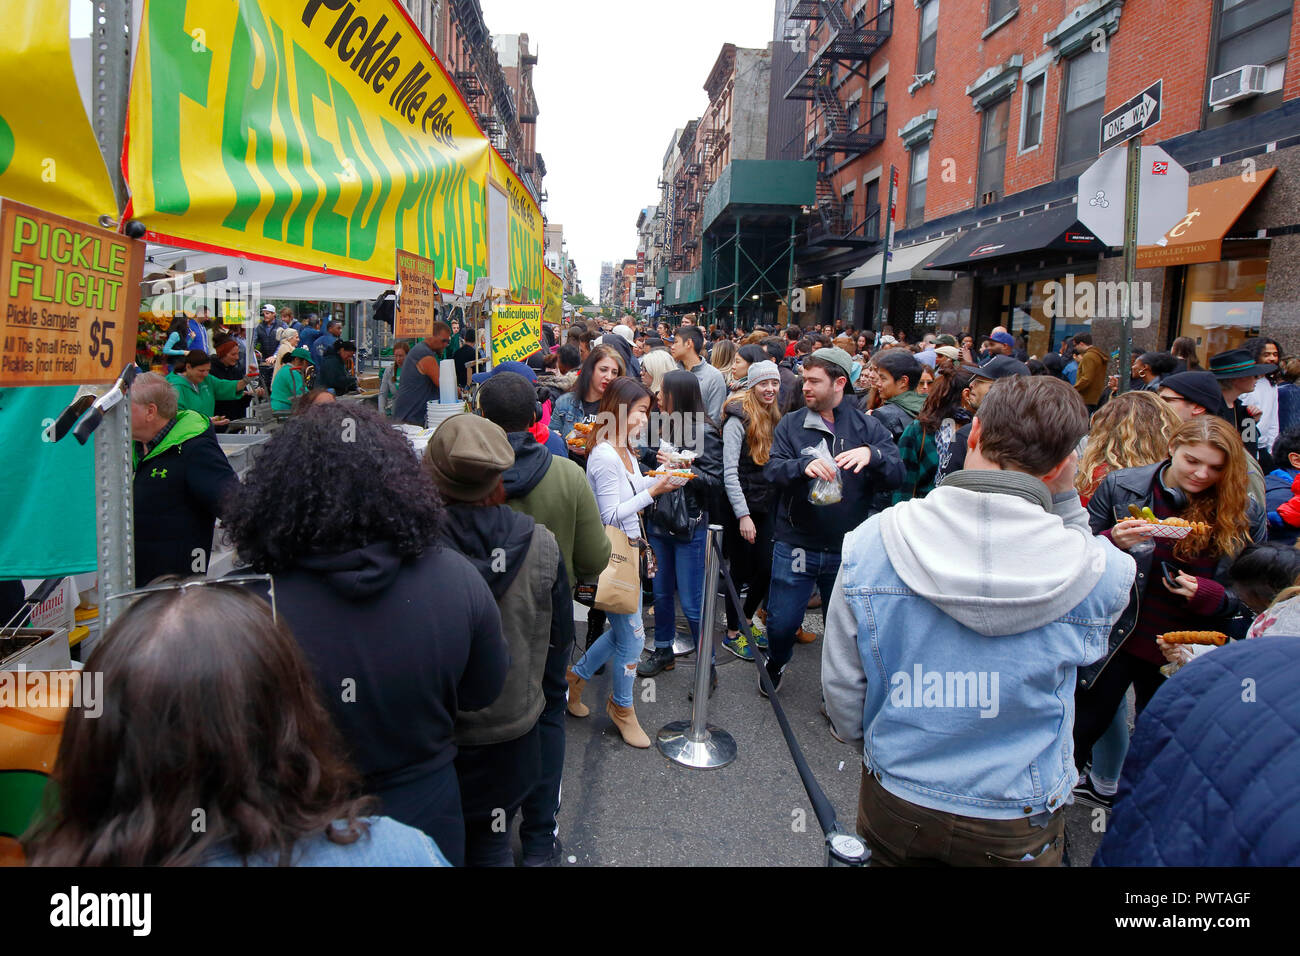 The scene at the Lower East Side Pickle Day 2018 in New York, NY. October 14, 2018 Stock Photo